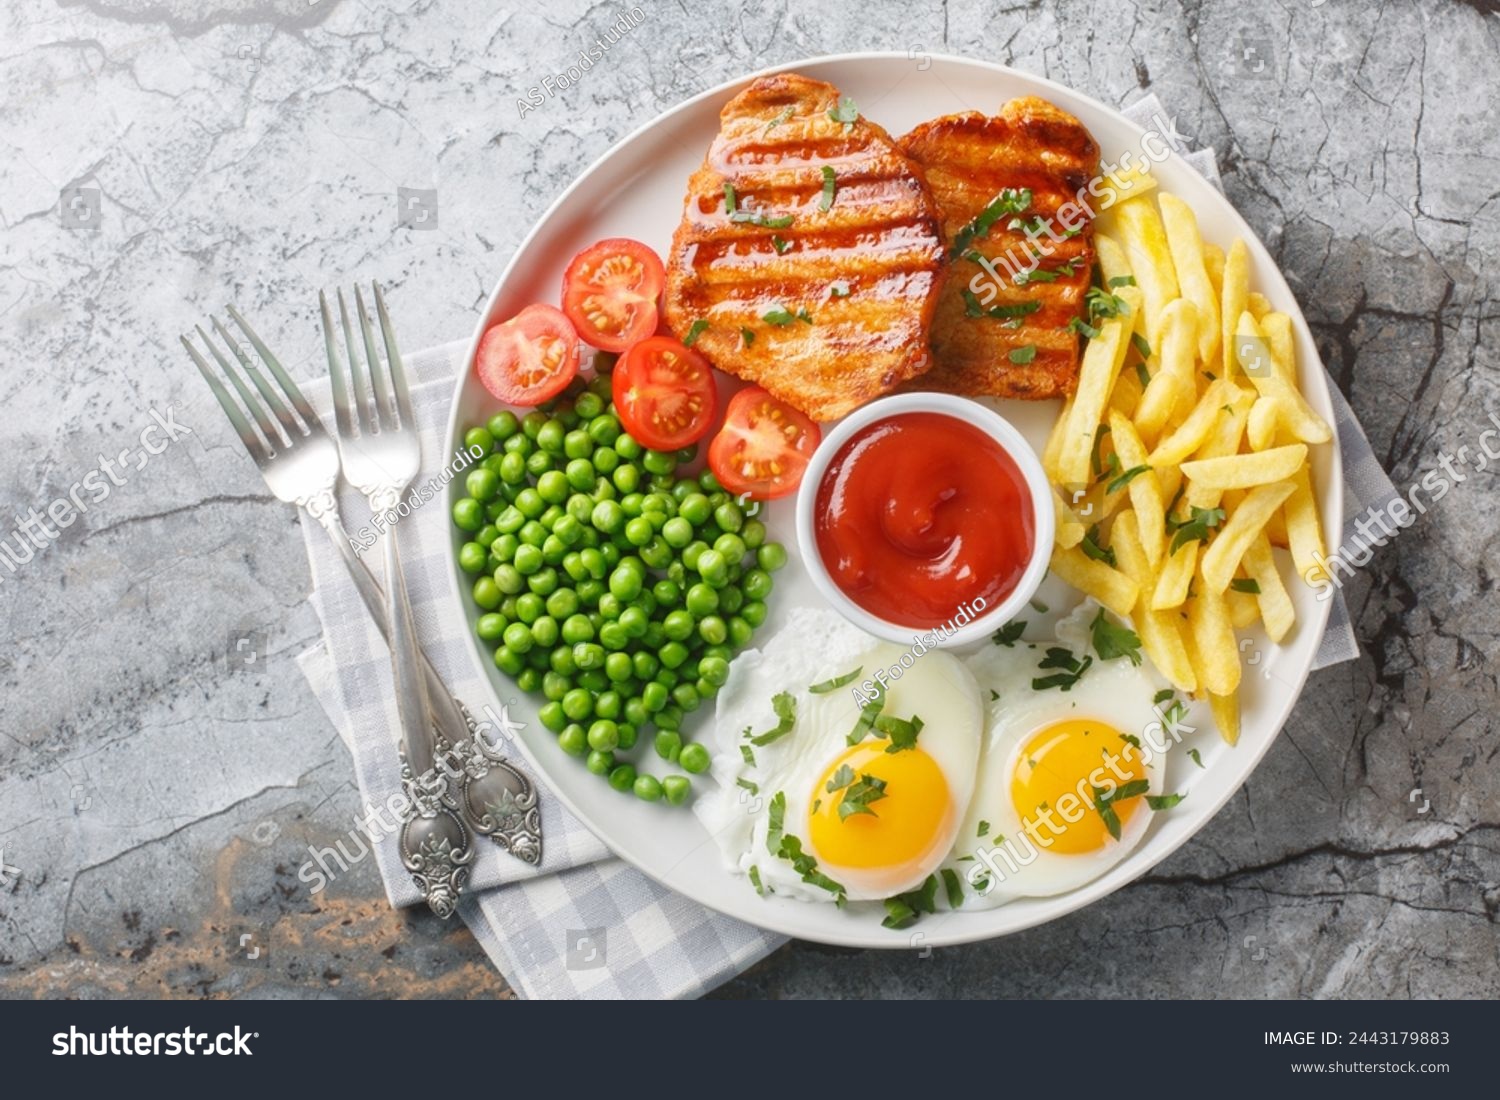 Tender grilled steak served with crisp golden French fries, fied eggs, green pea and fresh tomato closeup on the plate on the table. Horizontal top view from above
 #2443179883